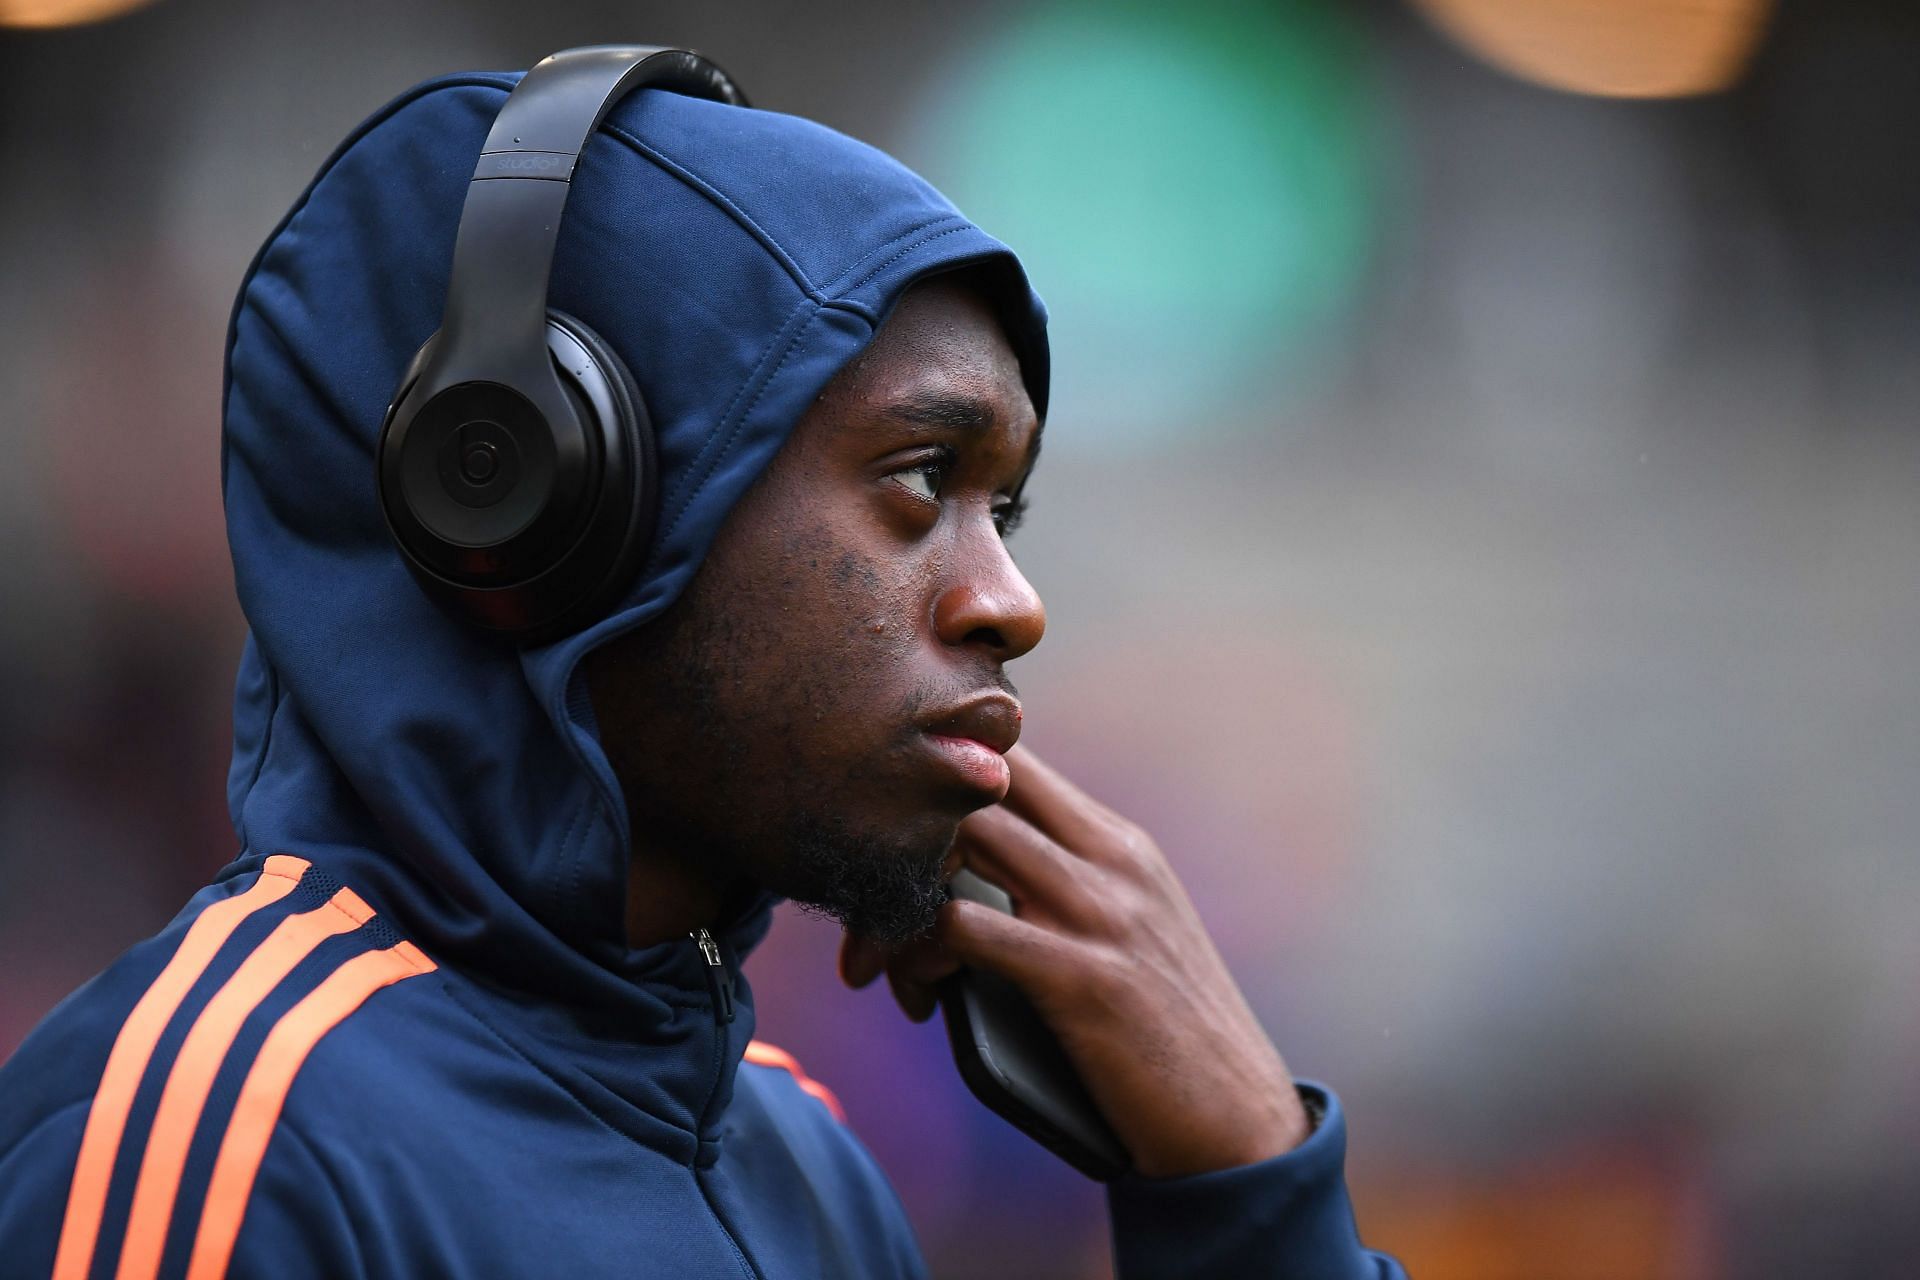 Wan-Bissaka looks set to stay for the time being